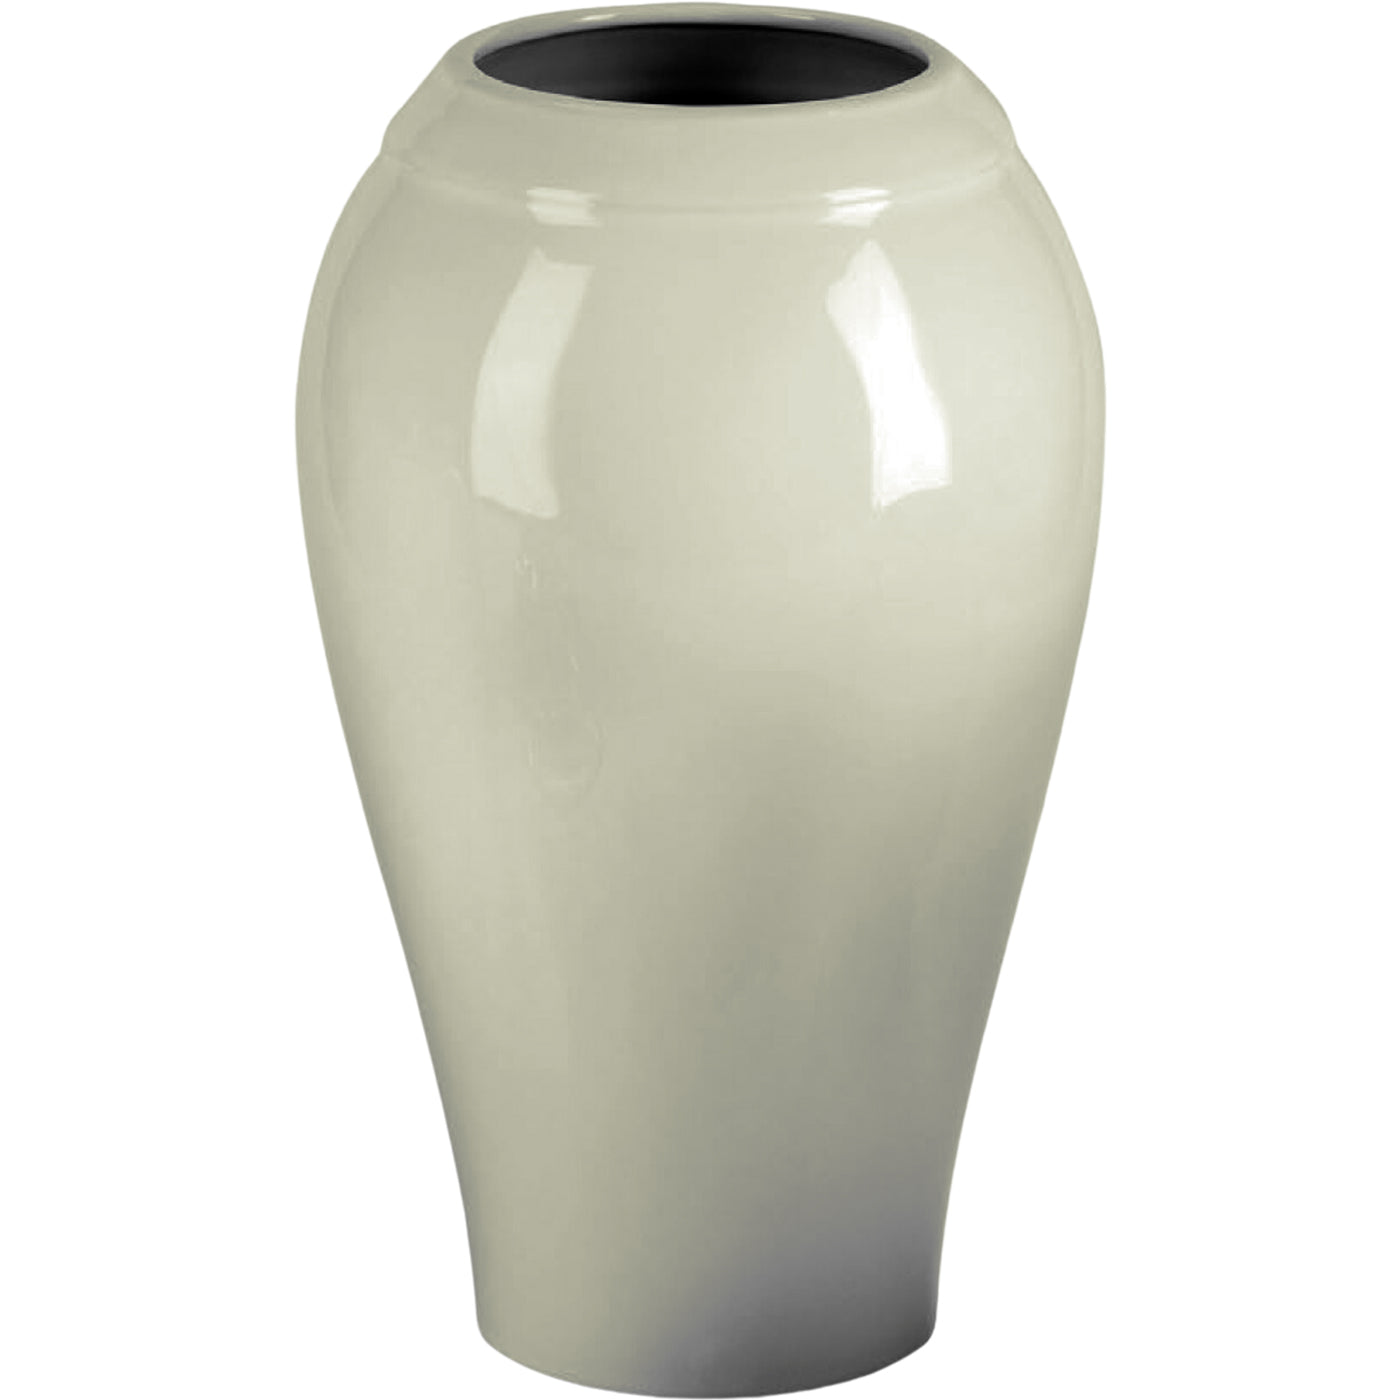 Grave vase Liscia ivory 21x13cm - 8.3x5.1in In ivory porcelain, wall attached LI144P/A